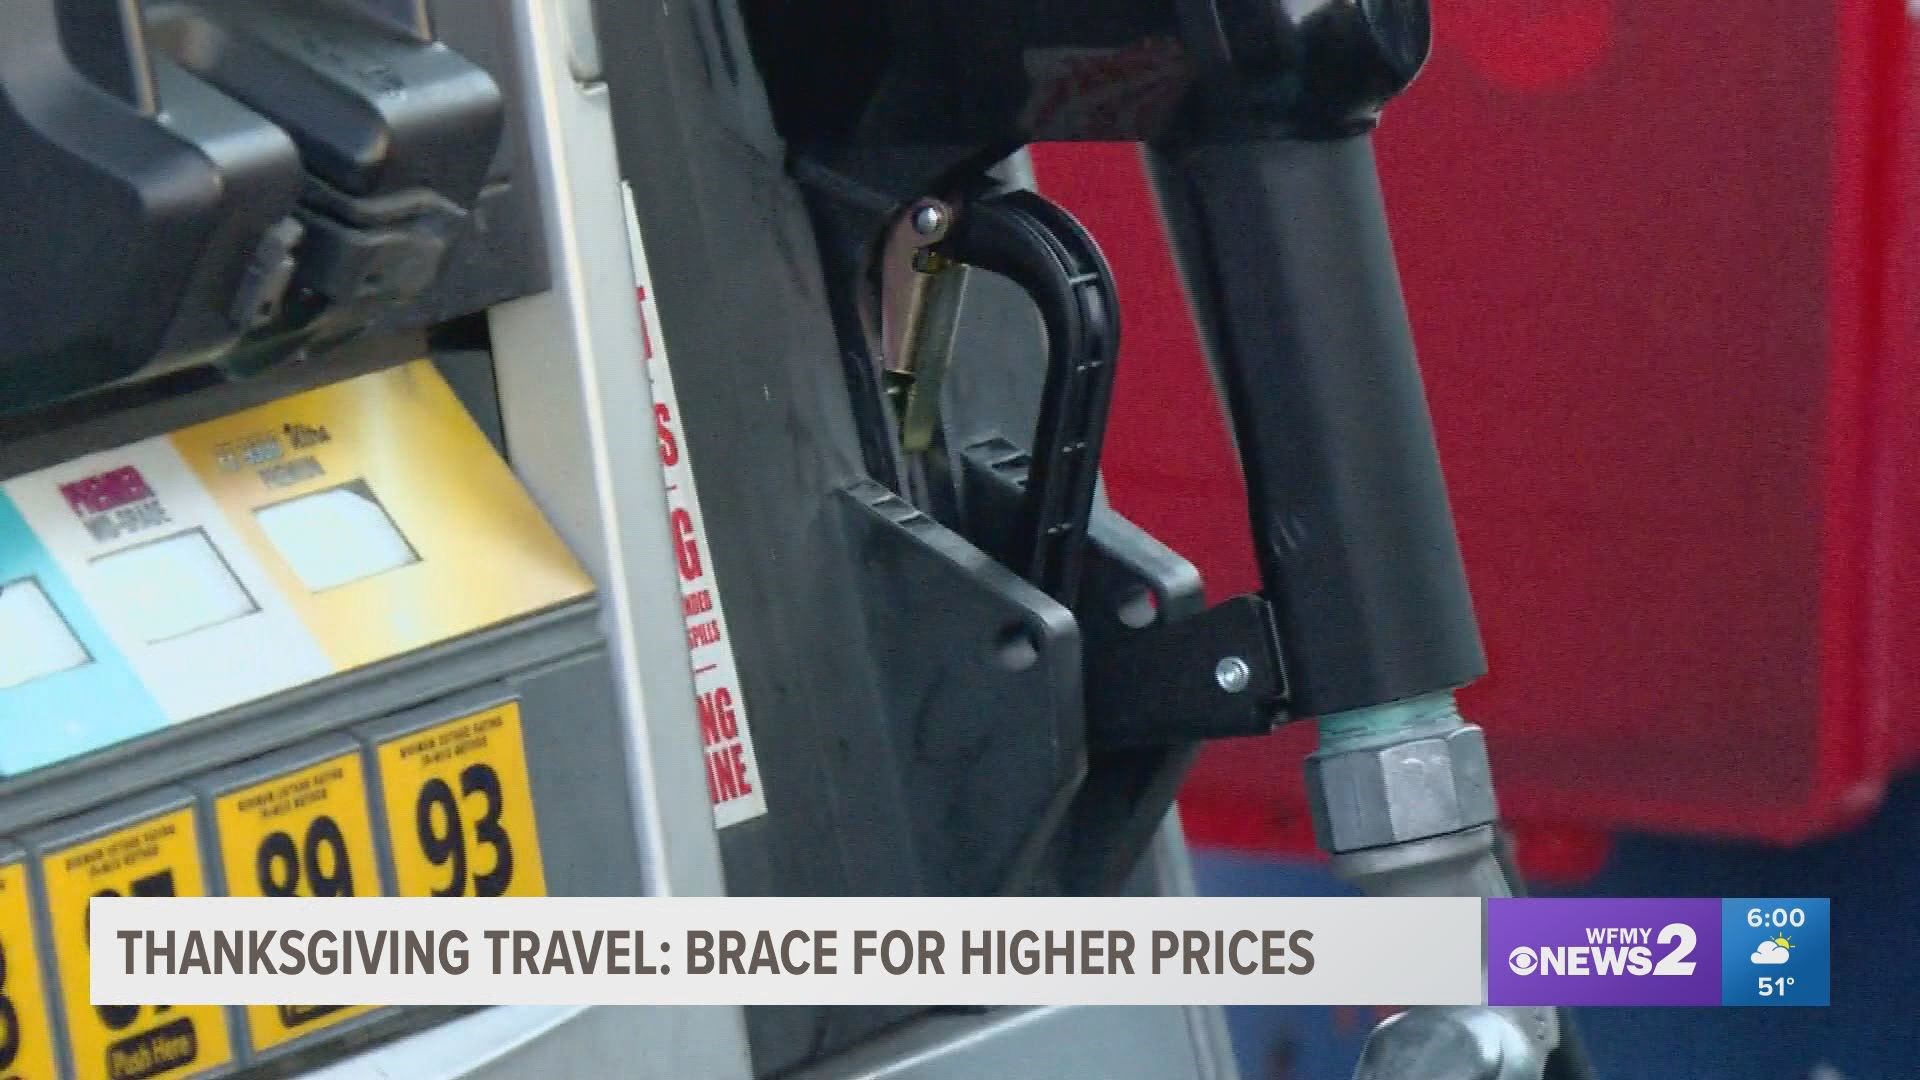 Consumer Reports simple ways that you can save on fuel costs.